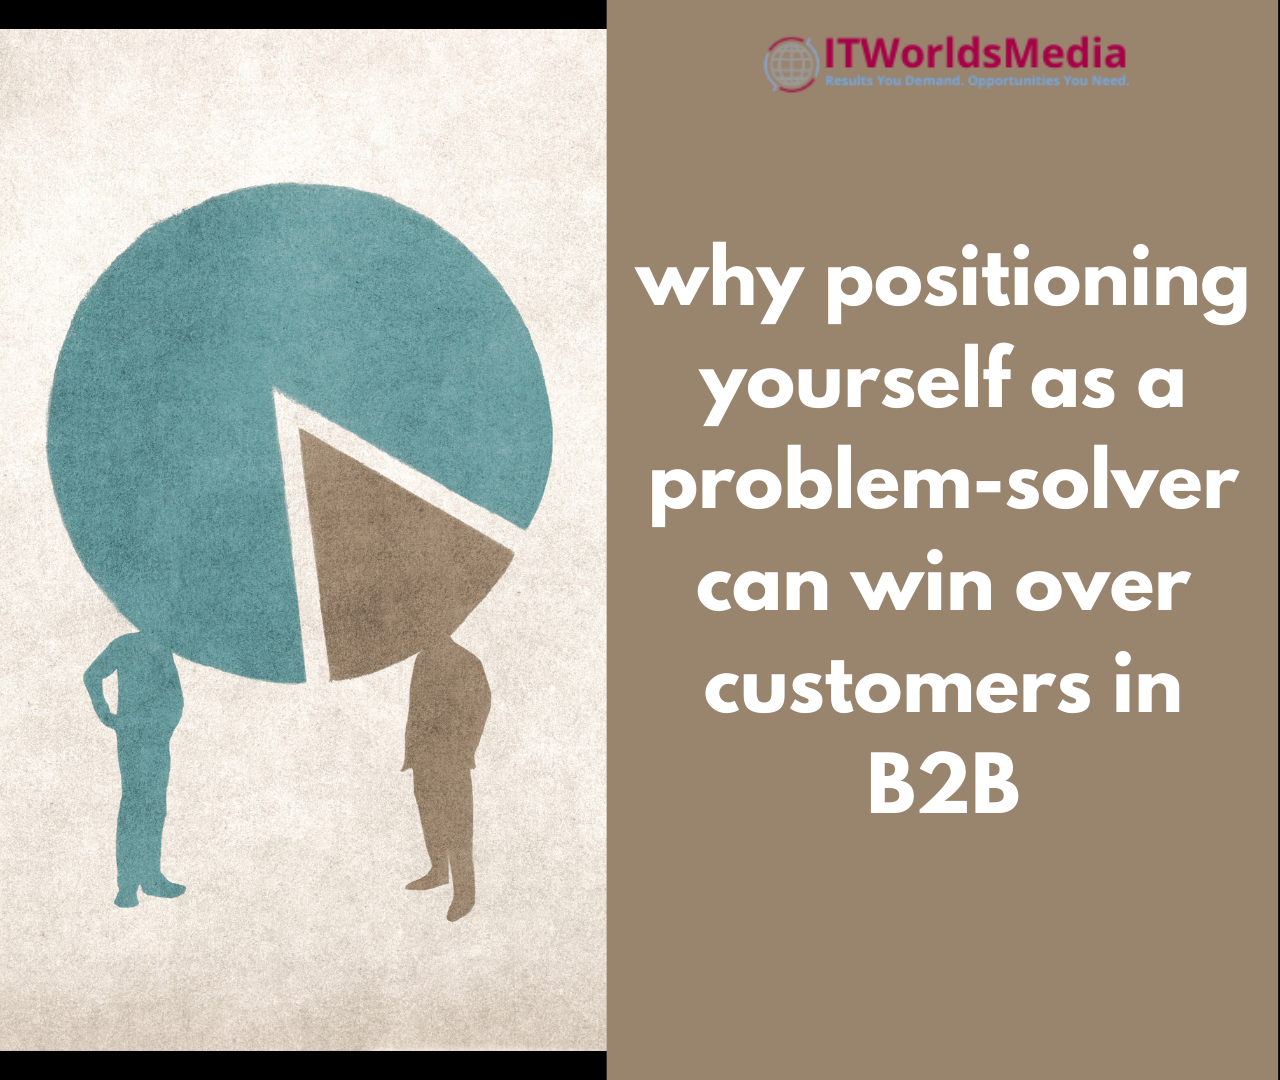 Why positioning yourself as a problem-solver can win over customers in B2B